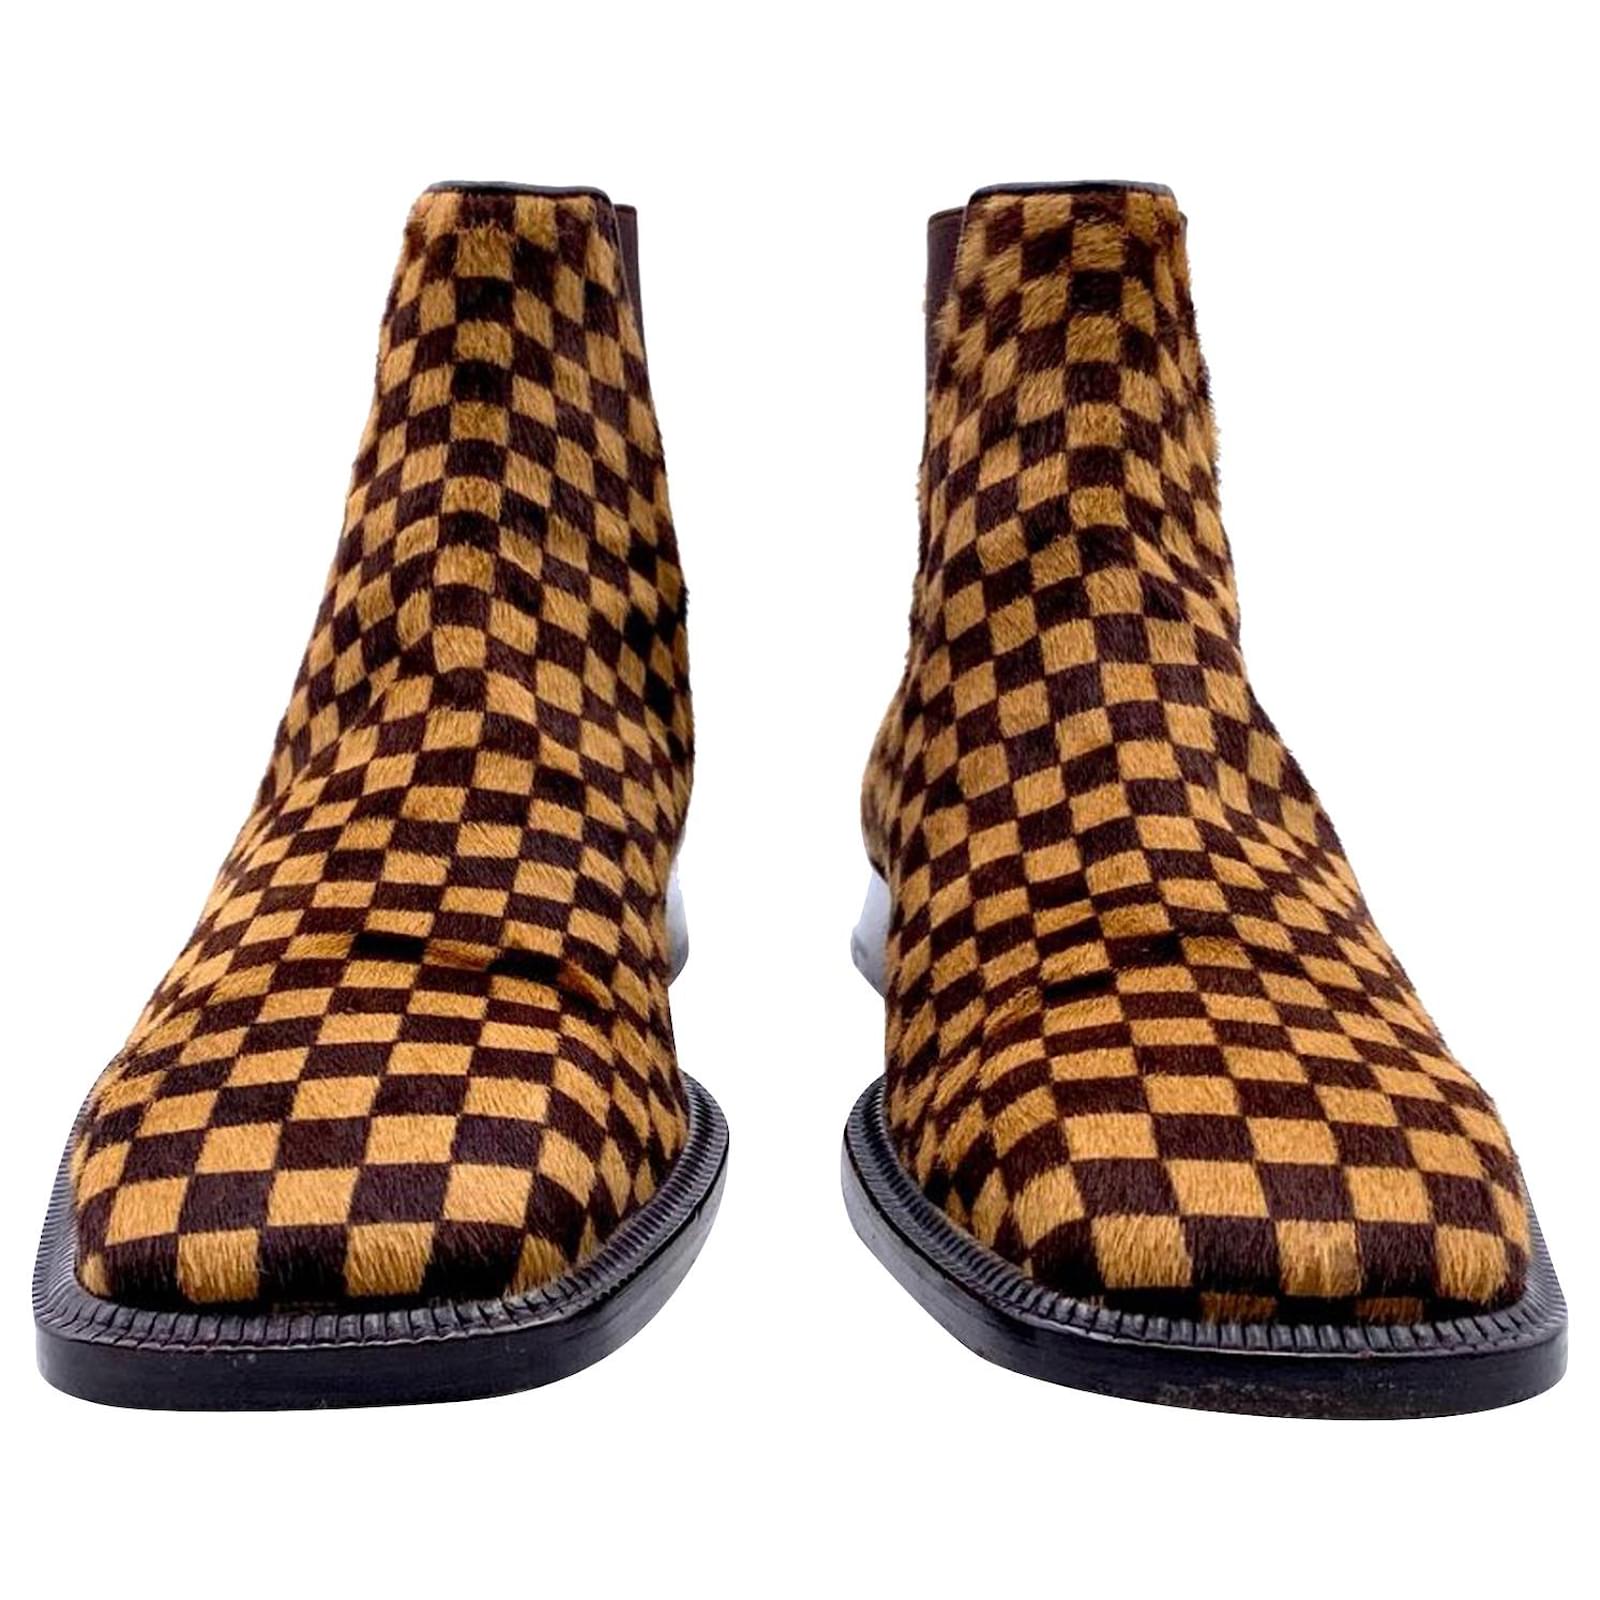 Louis Vuitton Brown Damier Ebene Calf Hair and Leather Slingback Sandals  Size 38 - ShopStyle